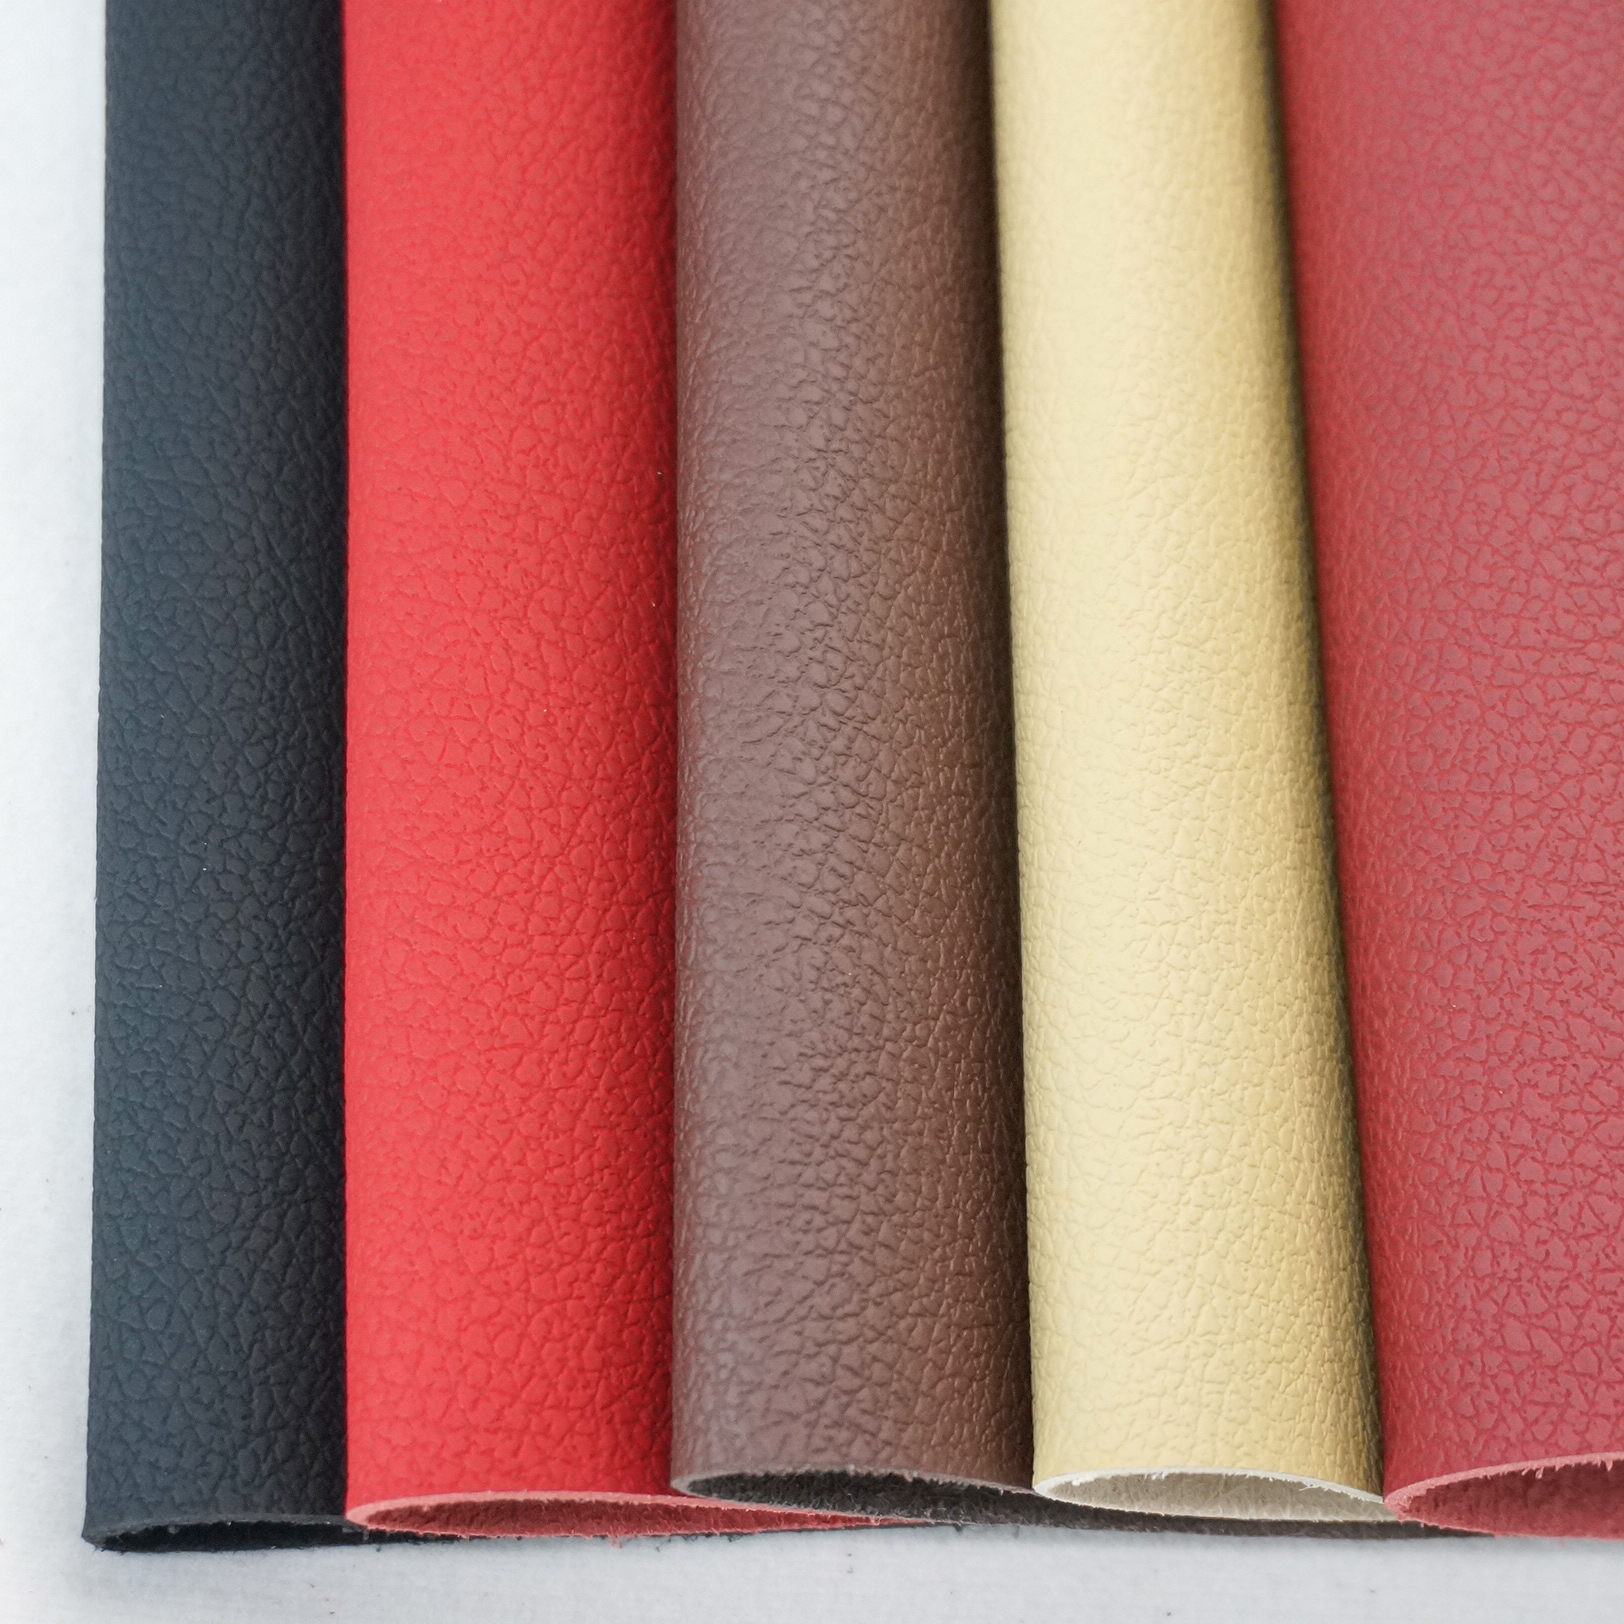 1. The microfiber leather have very good hand feel & comfortable touch, same as real leather.

2. Lighter weight than real leather. Microfiber Leather for Car Seat Cover is usually 500gsm – 700gsm.

3. Better performance than real leather. Tensile strenght, break strength, tear strength, peeling strength, abrasion resistance, hydrolysis resistance all beyond real leather.

4. Texture & Color can be customized, fashion pattern.

5. Easy to clean.

6. Can up to 100% usage rate!